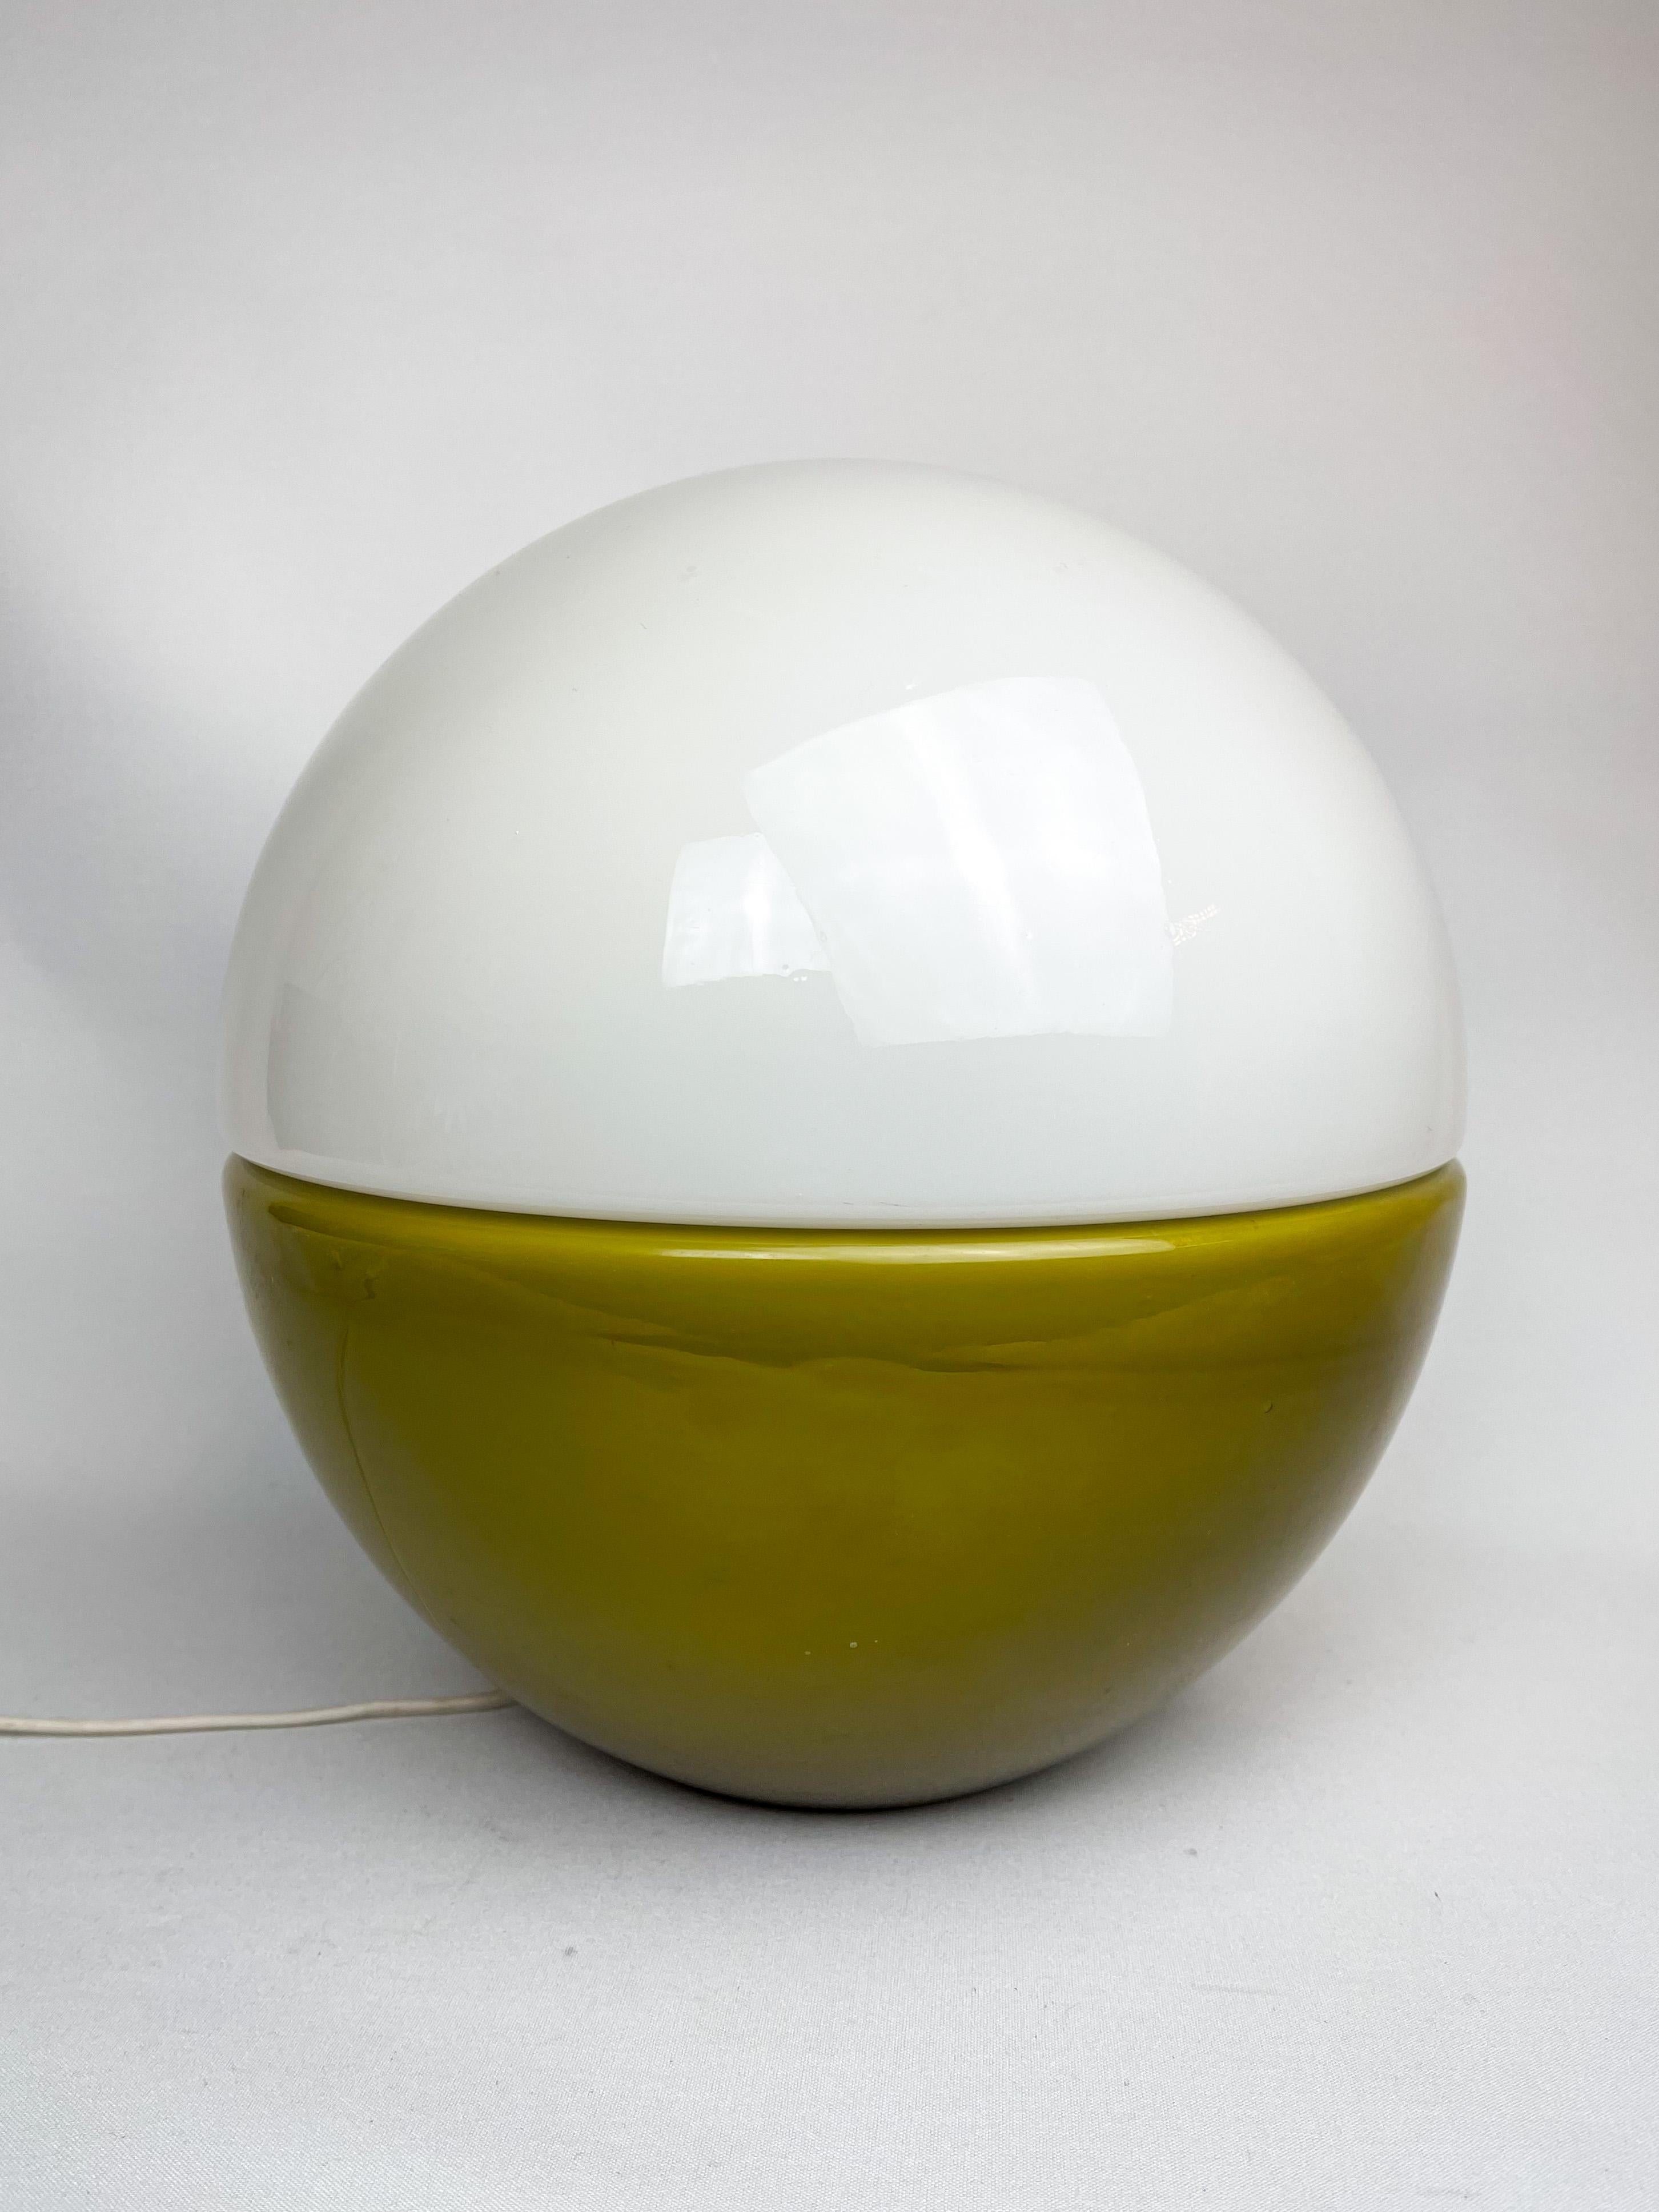 This rare and large Bergboms glass UFO looking table lamp has an Art Deco/1970s look with the touch of Swedish midcentury.
The lamp itself is made with opaline glass top and a heavier colored glass bottom. 

Good working condition.